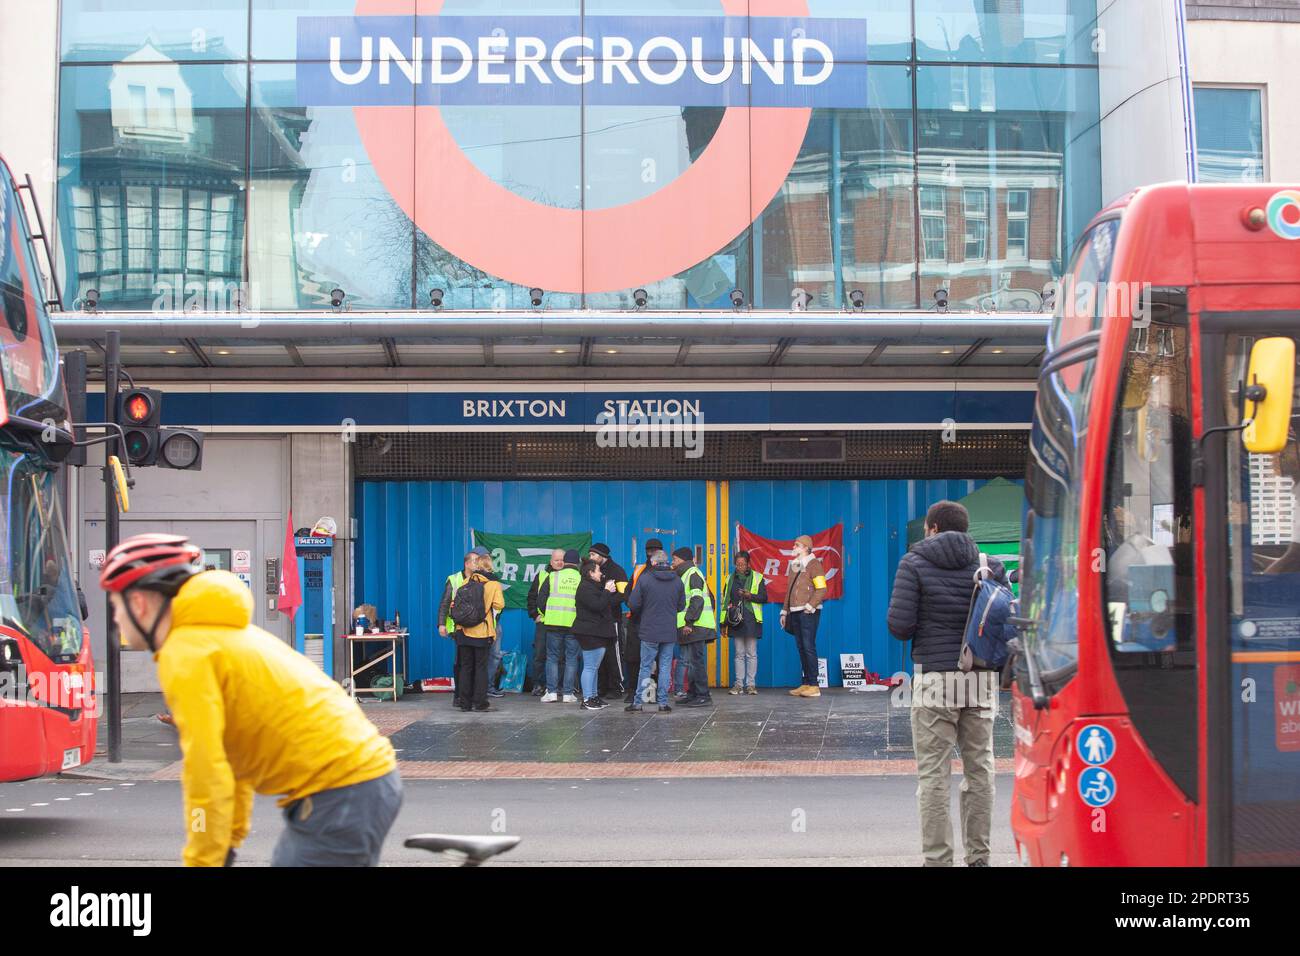 London, UK, 15 March 2023: The RMT and Aslef unions are on strike, completely closing the London Underground today, with a picket line at Brixton station. A cyclist speeds past the station. Other commuters squeezed on to buses but sometimes they arrived too full to take on any more passengers. Anna Watson/Alamy Live News Stock Photo